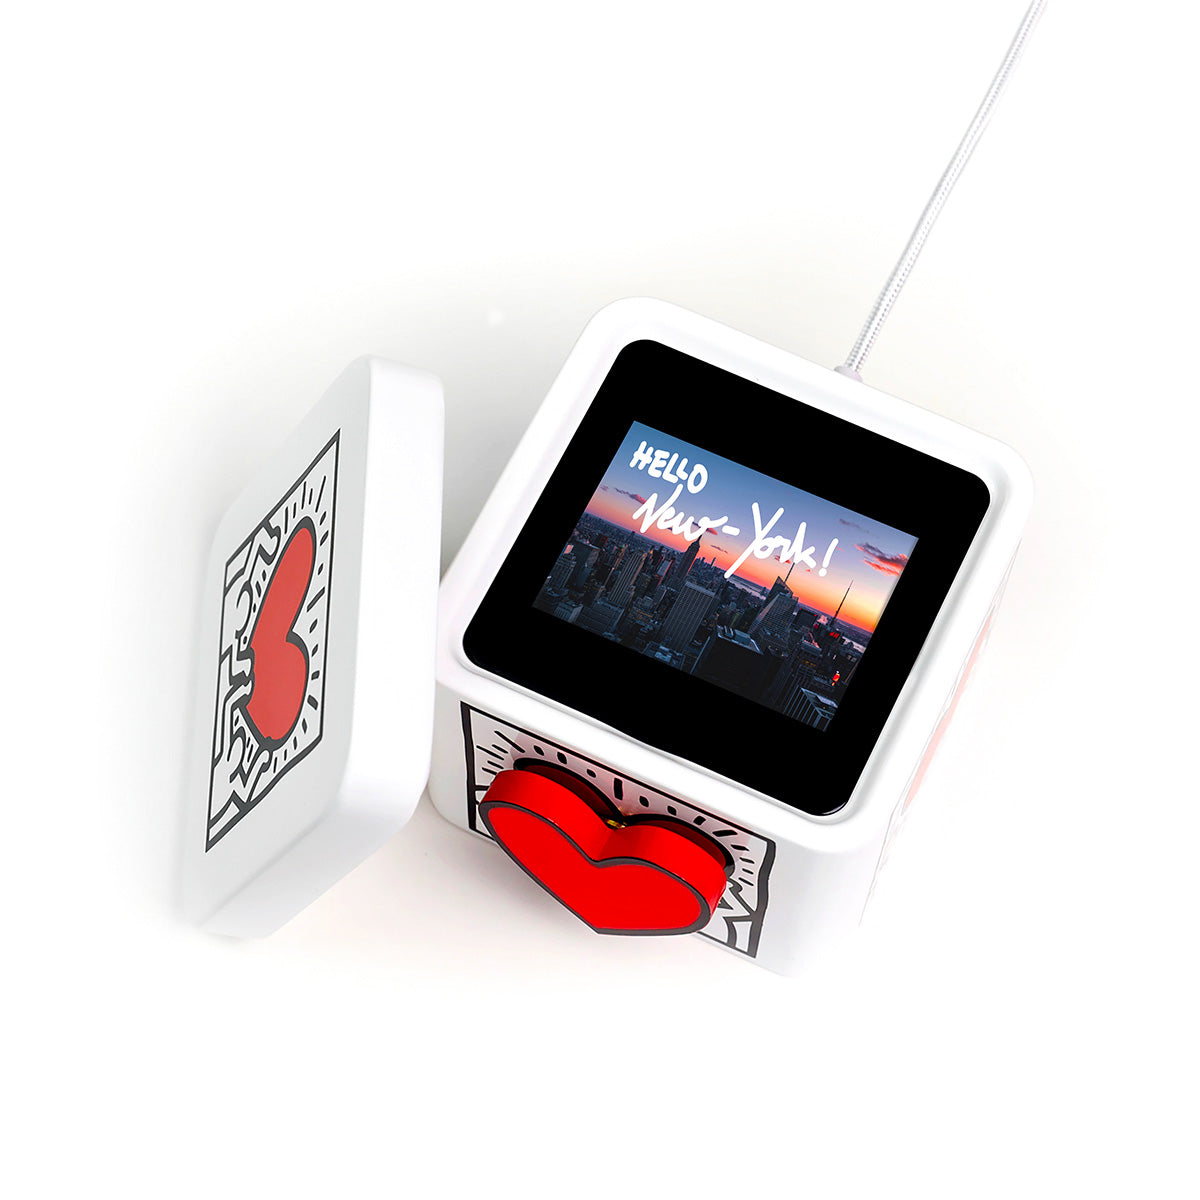 Photo of opened Keith Haring Lovebox, with custom message displayed on screen, on white background.